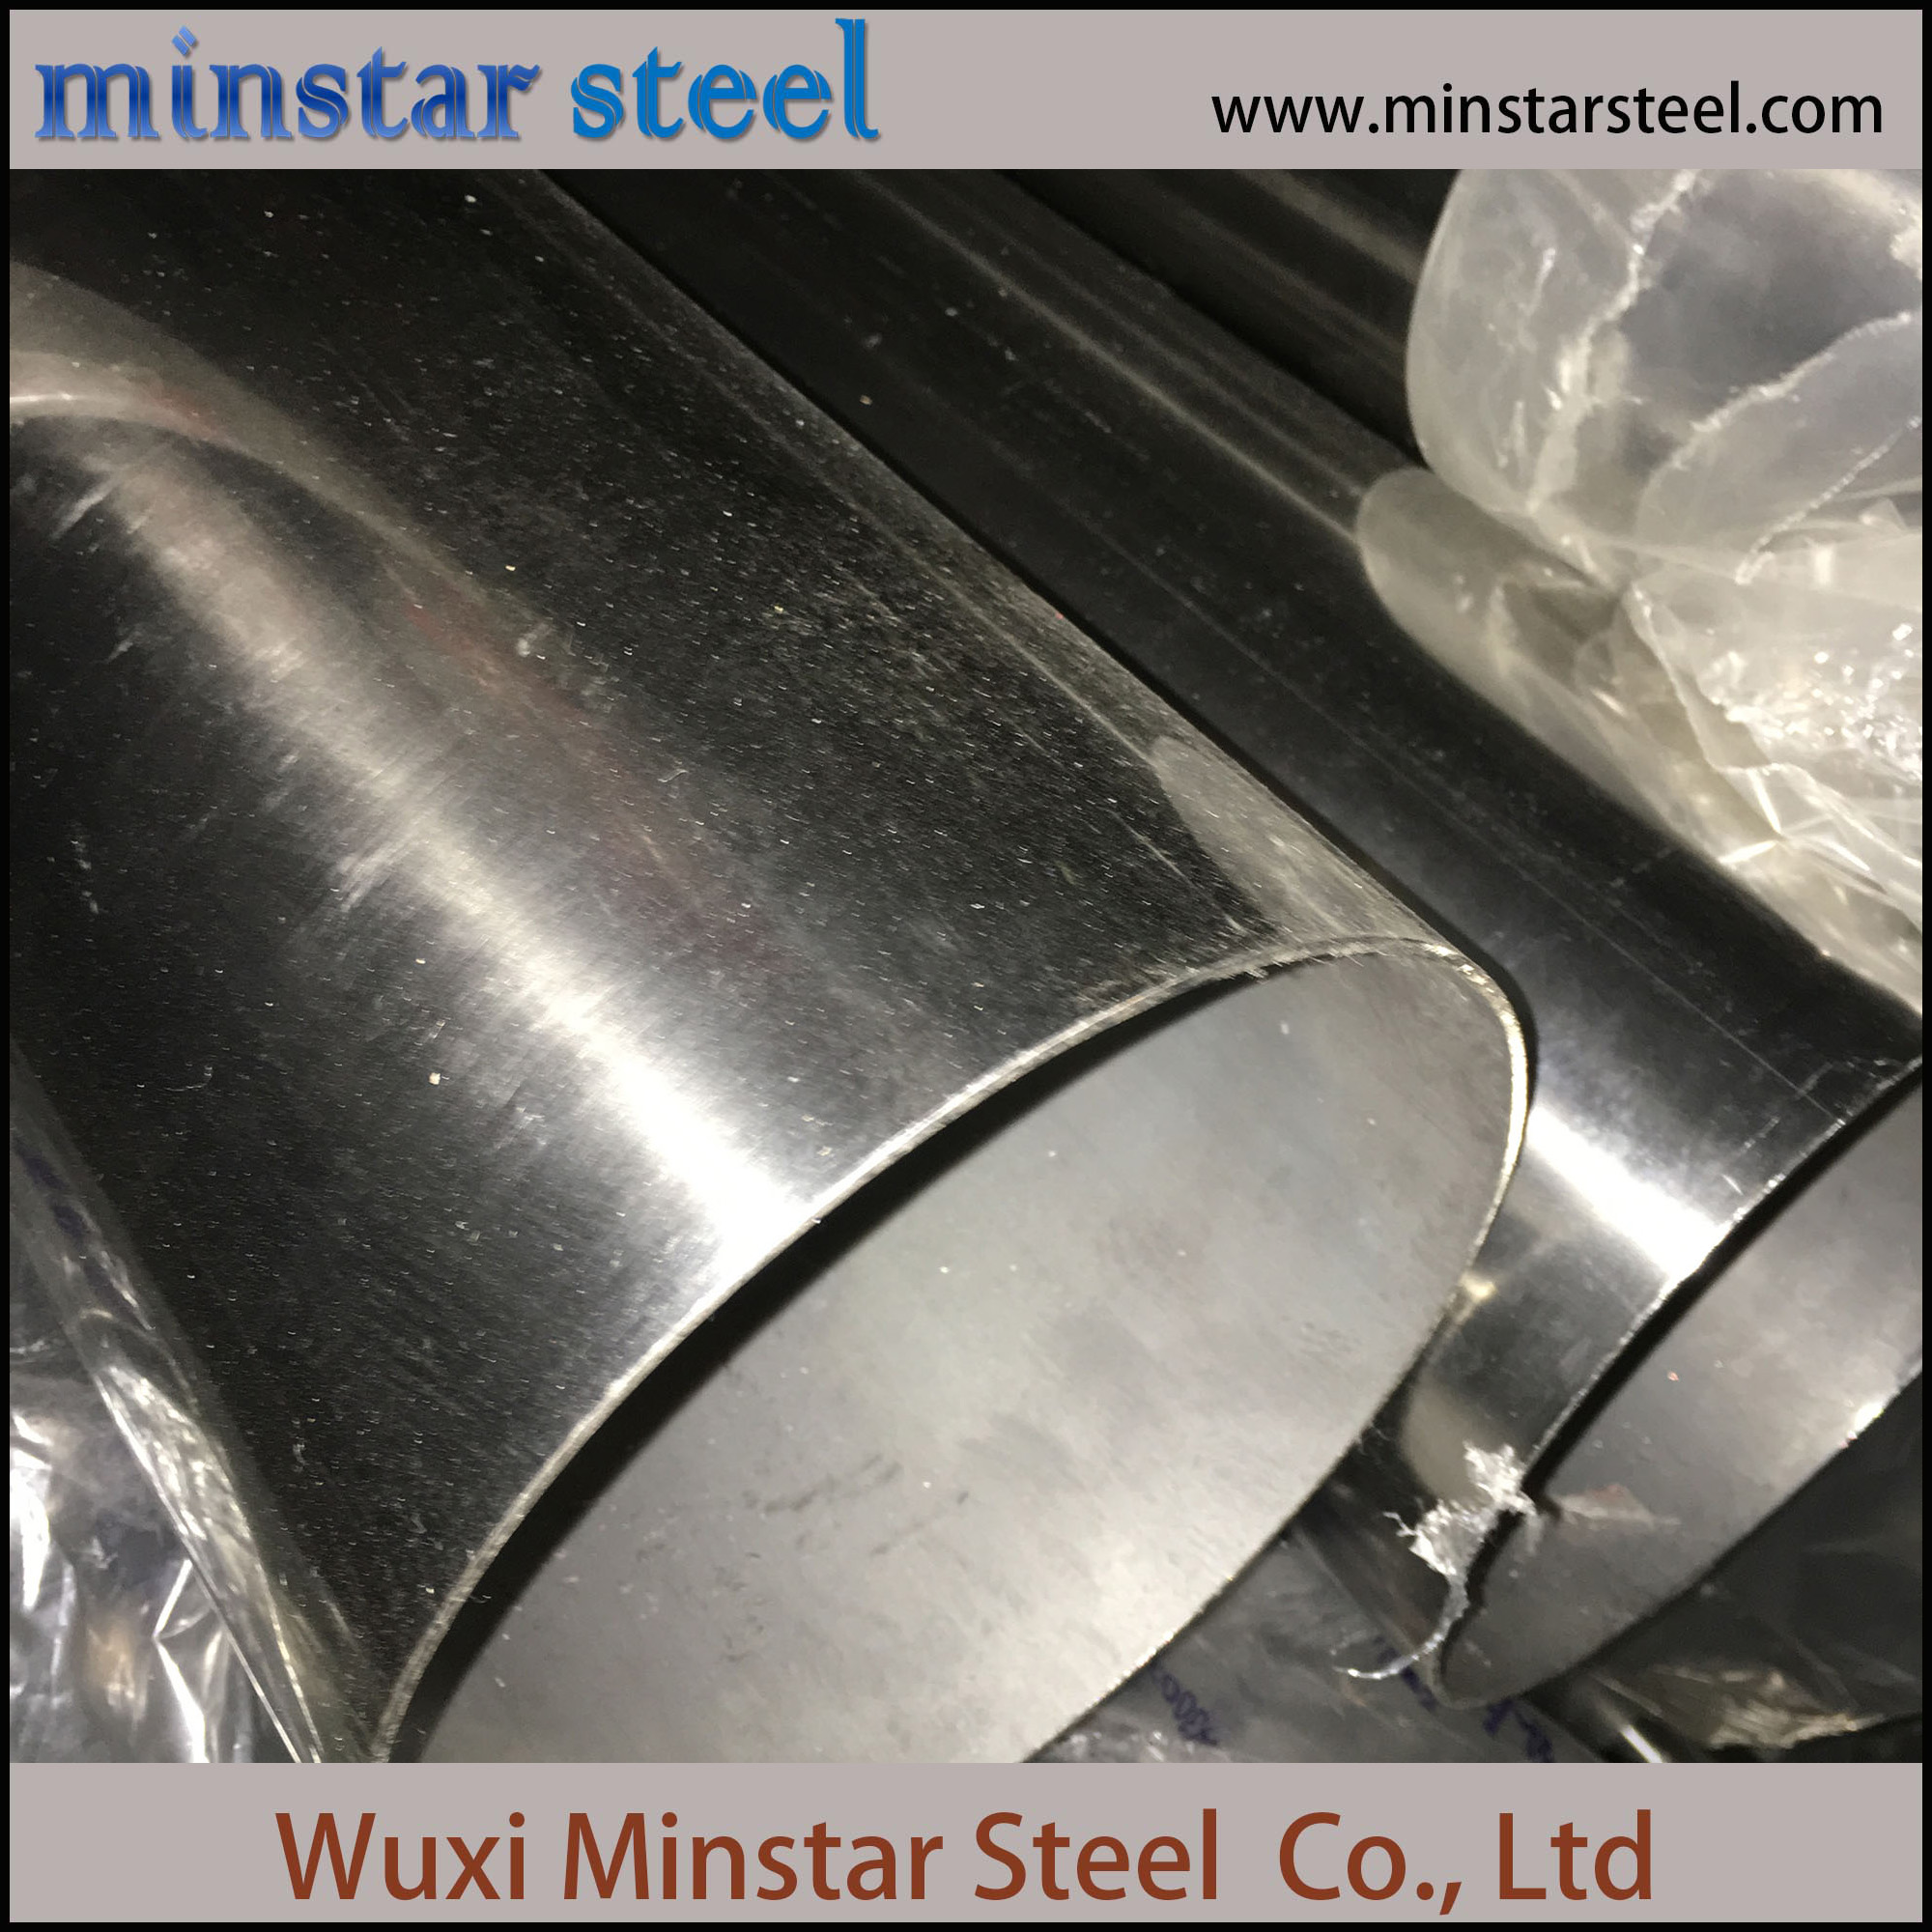 SELECTING THE BEST STAINLESS STEEL MATERIAL